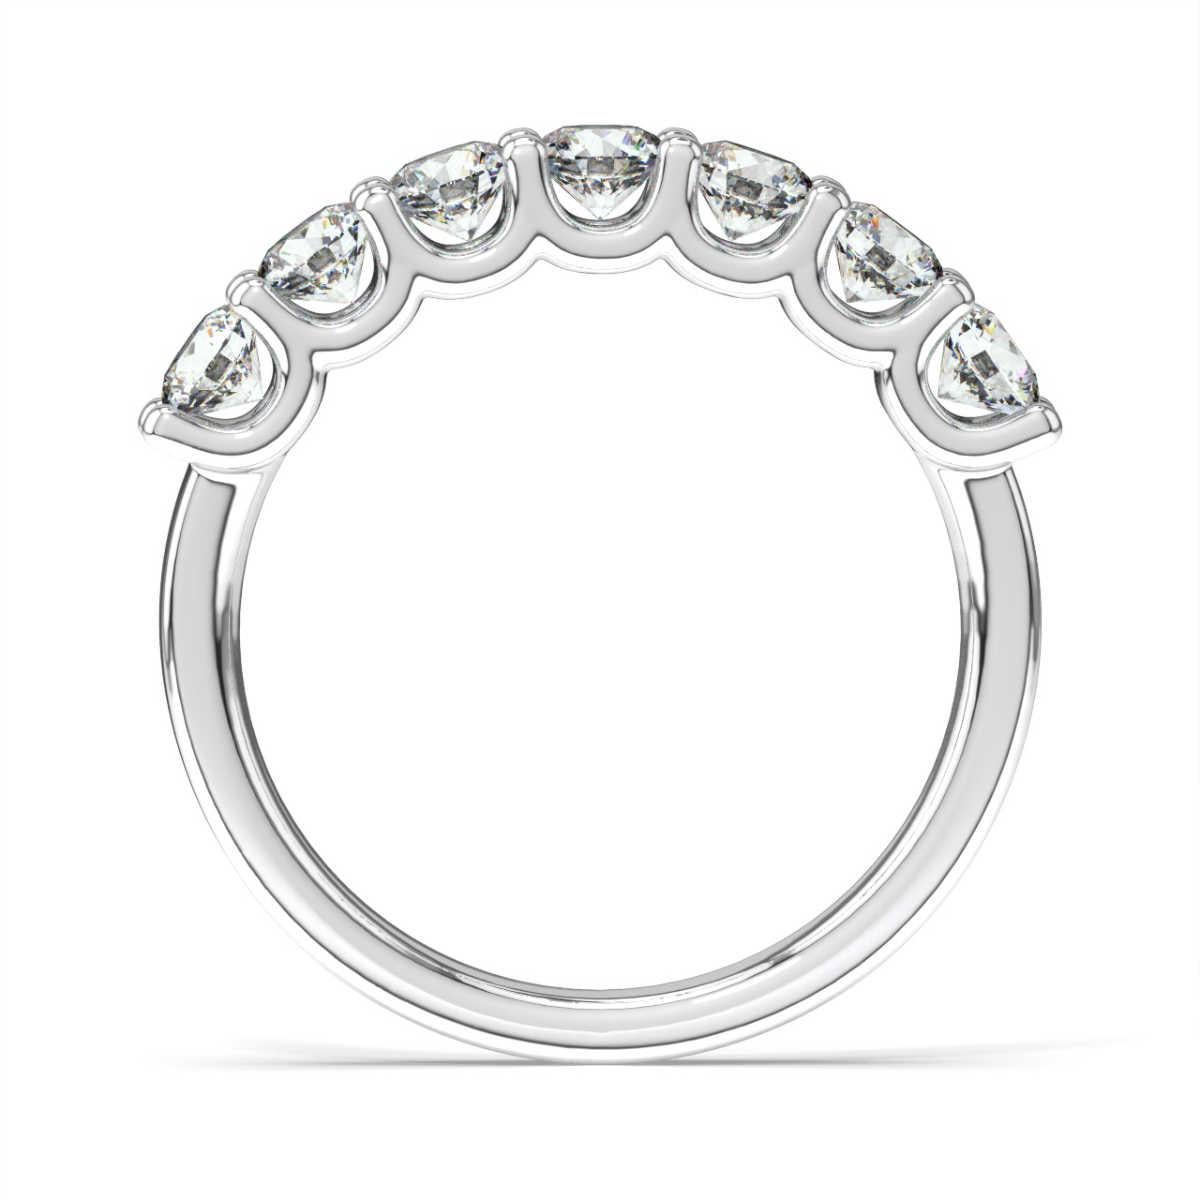 This ring features 7 round brilliant diamonds in a total weight of 1 carat set in a delicate 